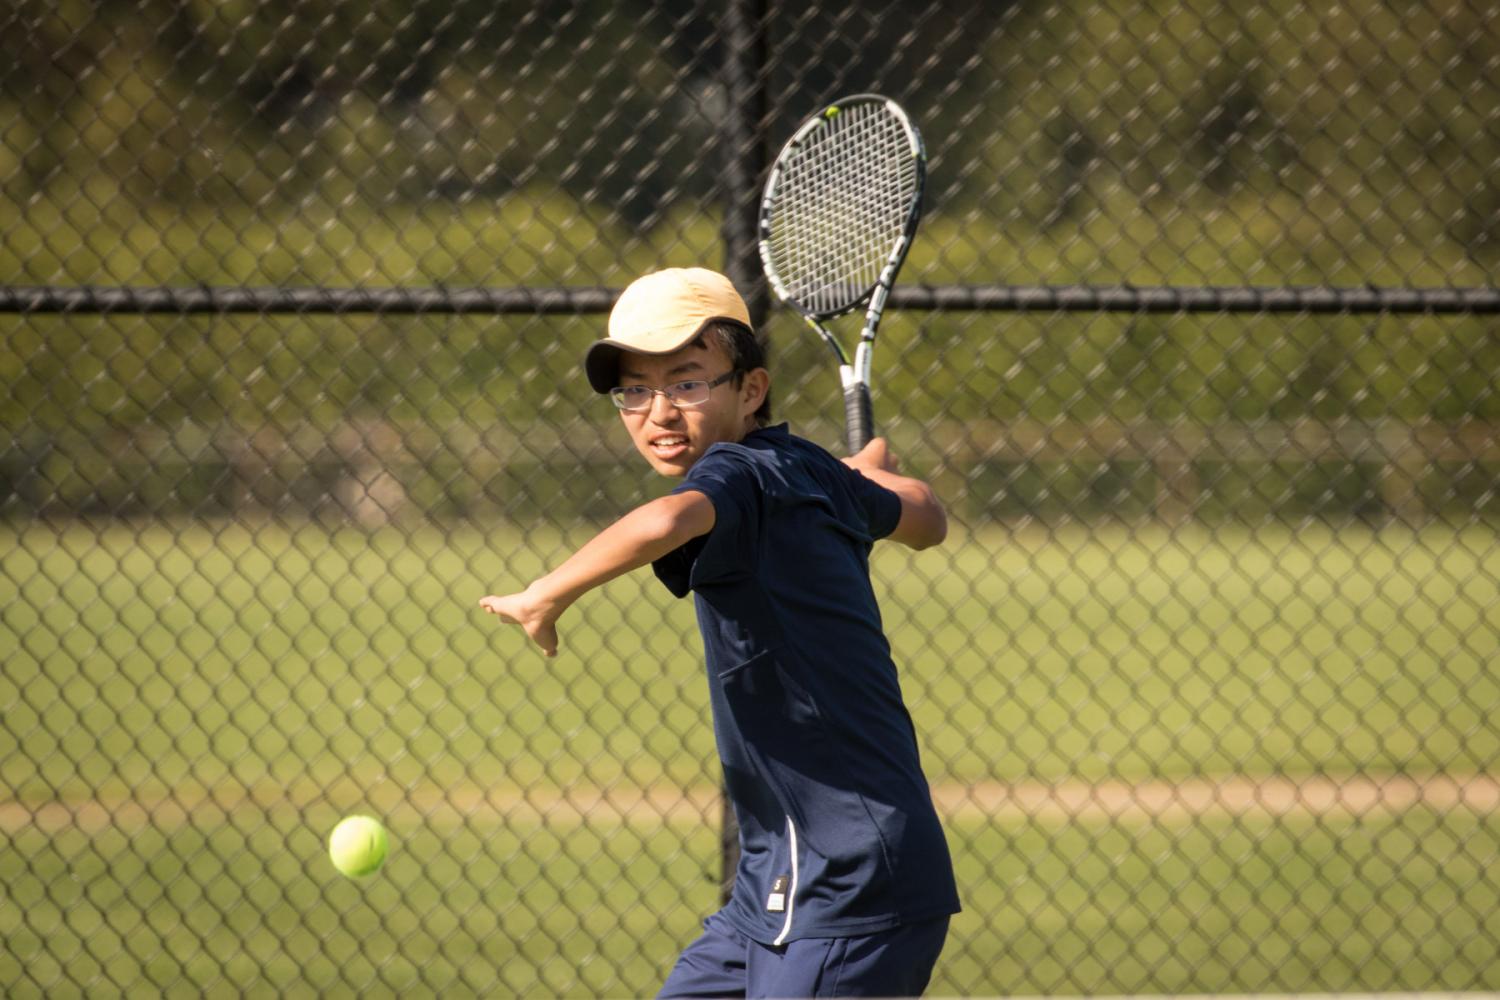 Boys Tennis Finishes the Year